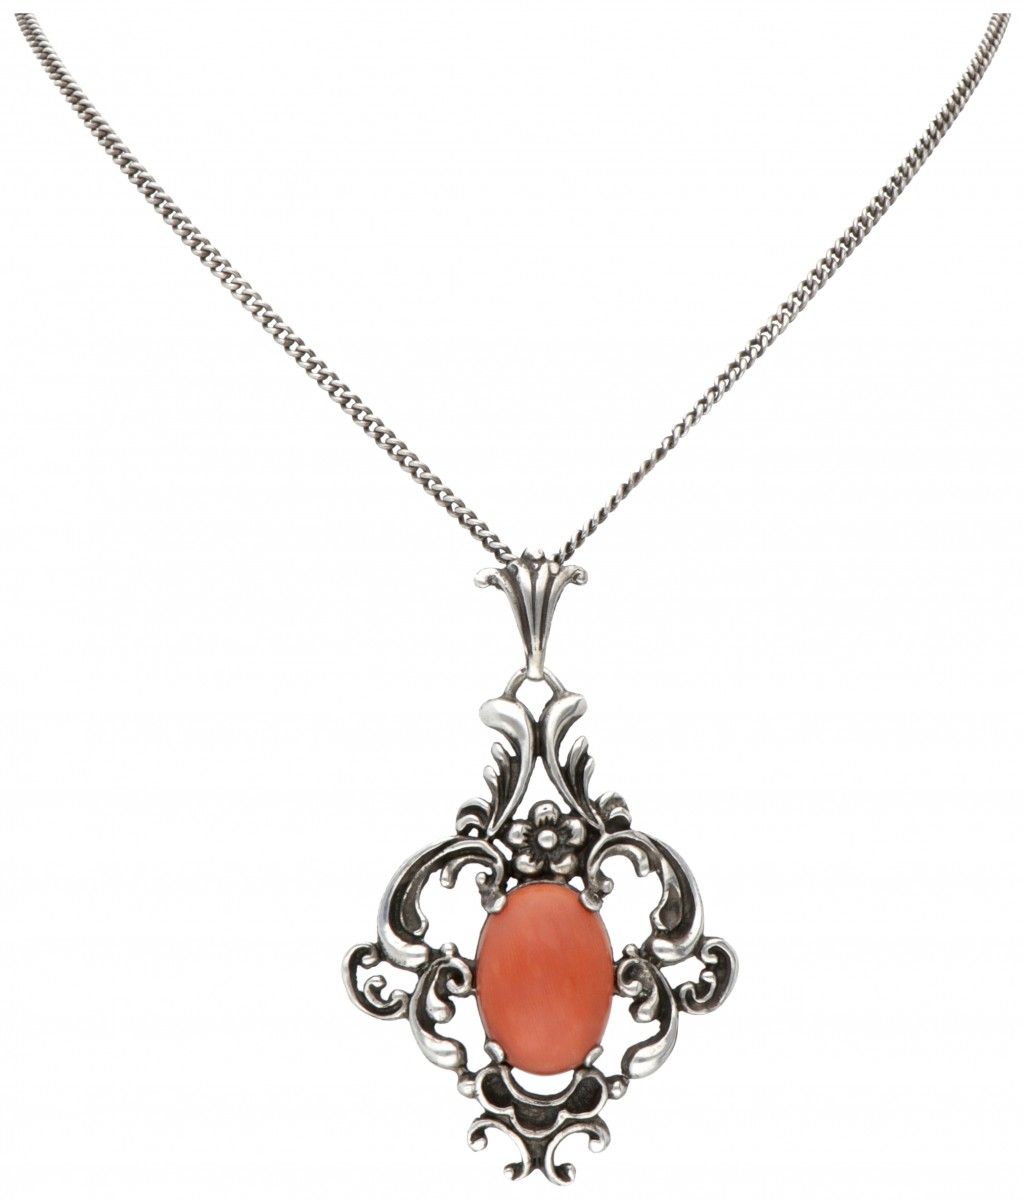 Silver necklace with pendant set with approx. 7.29 ct. Red coral - 835/1000. Pun&hellip;